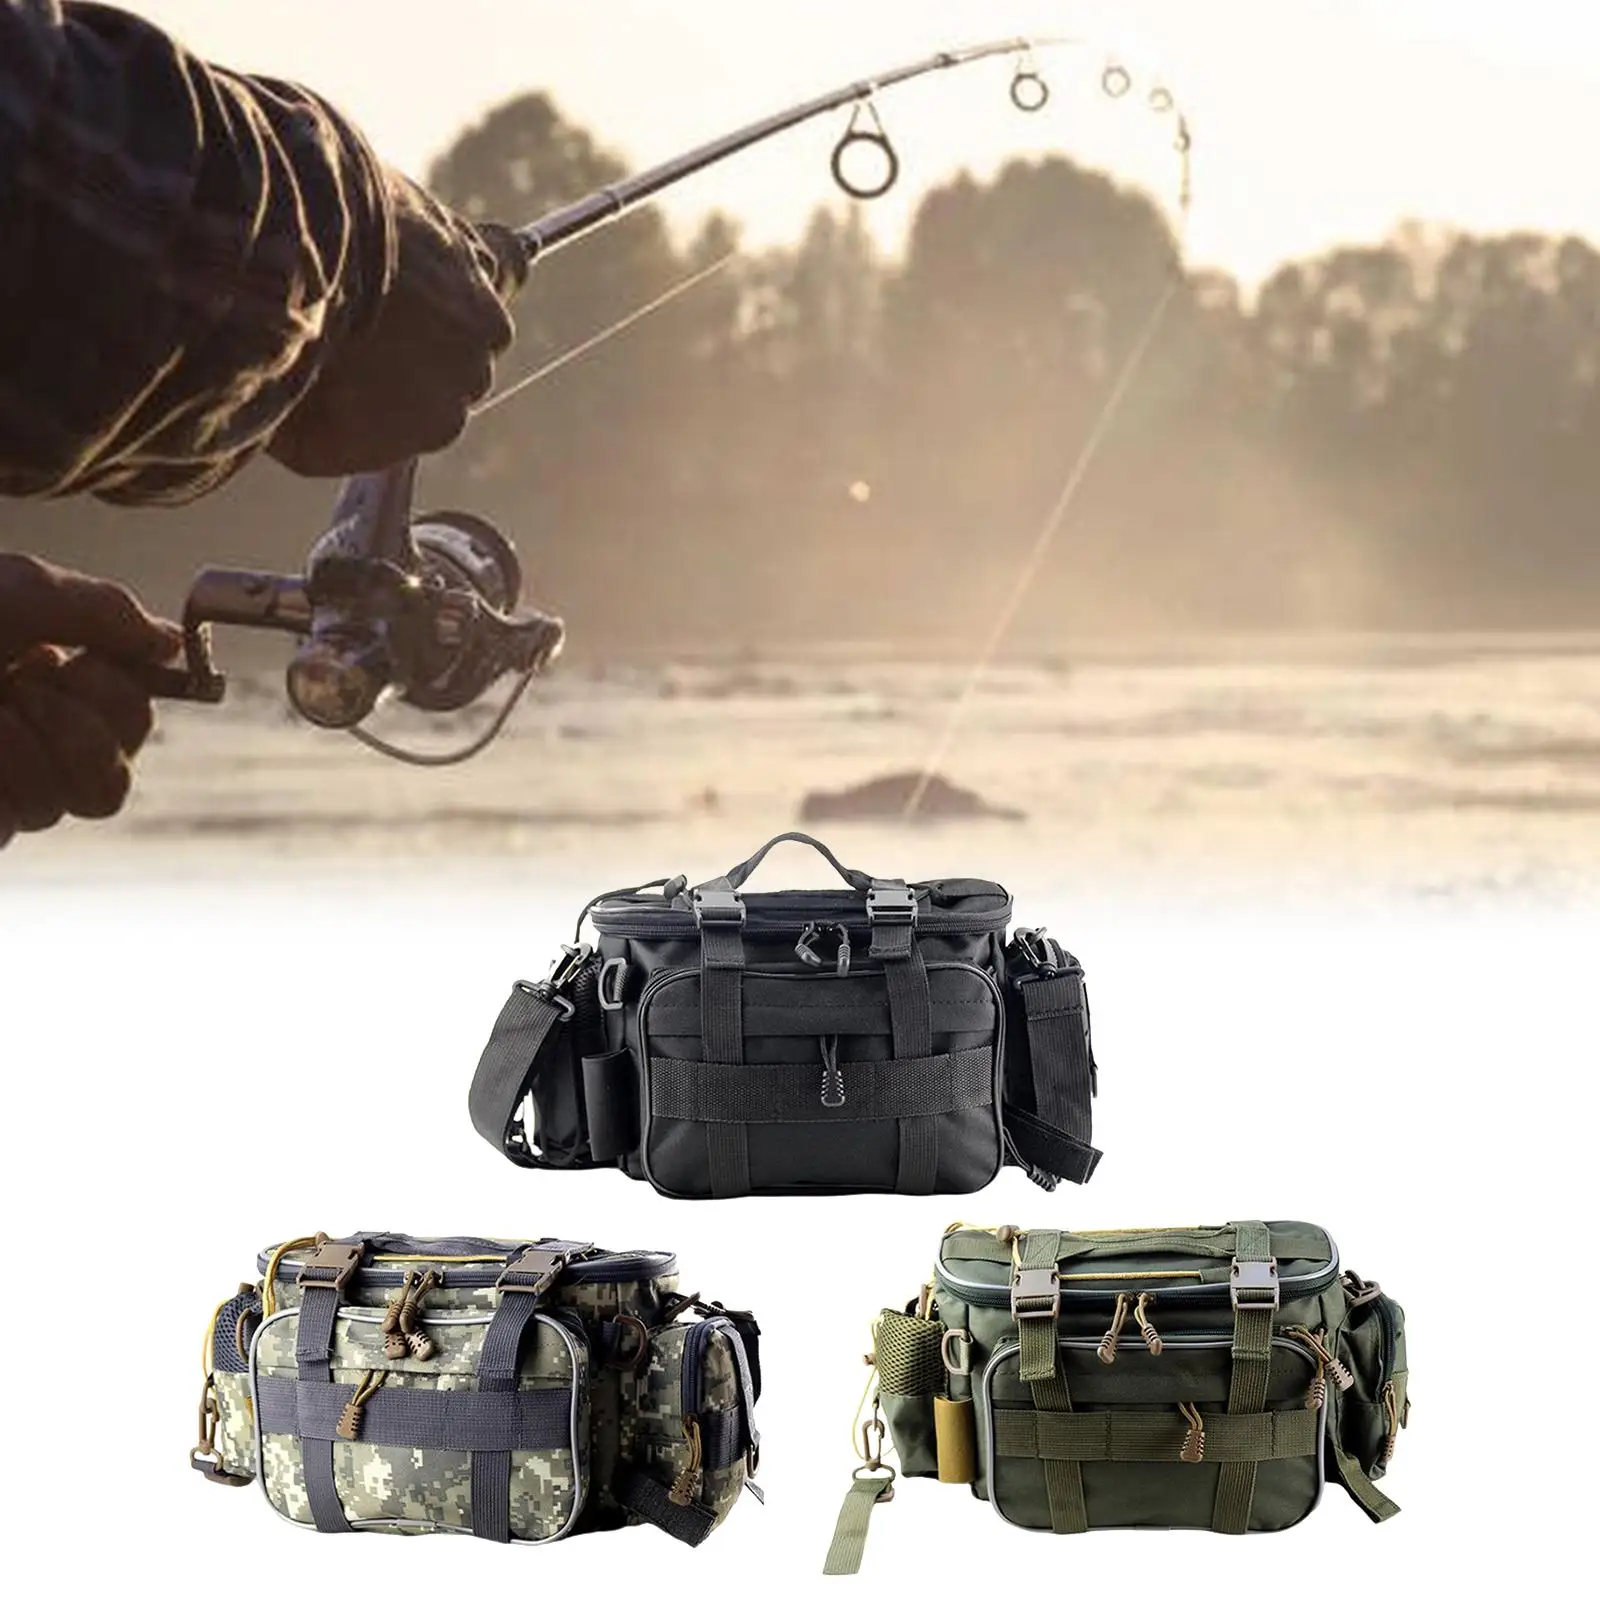 Portable Fishing Backpack Waterproof Waist Organizer Pack Lure Gears Storage Gear for Sea Fishing Travel Cycle Hiking Saltwater